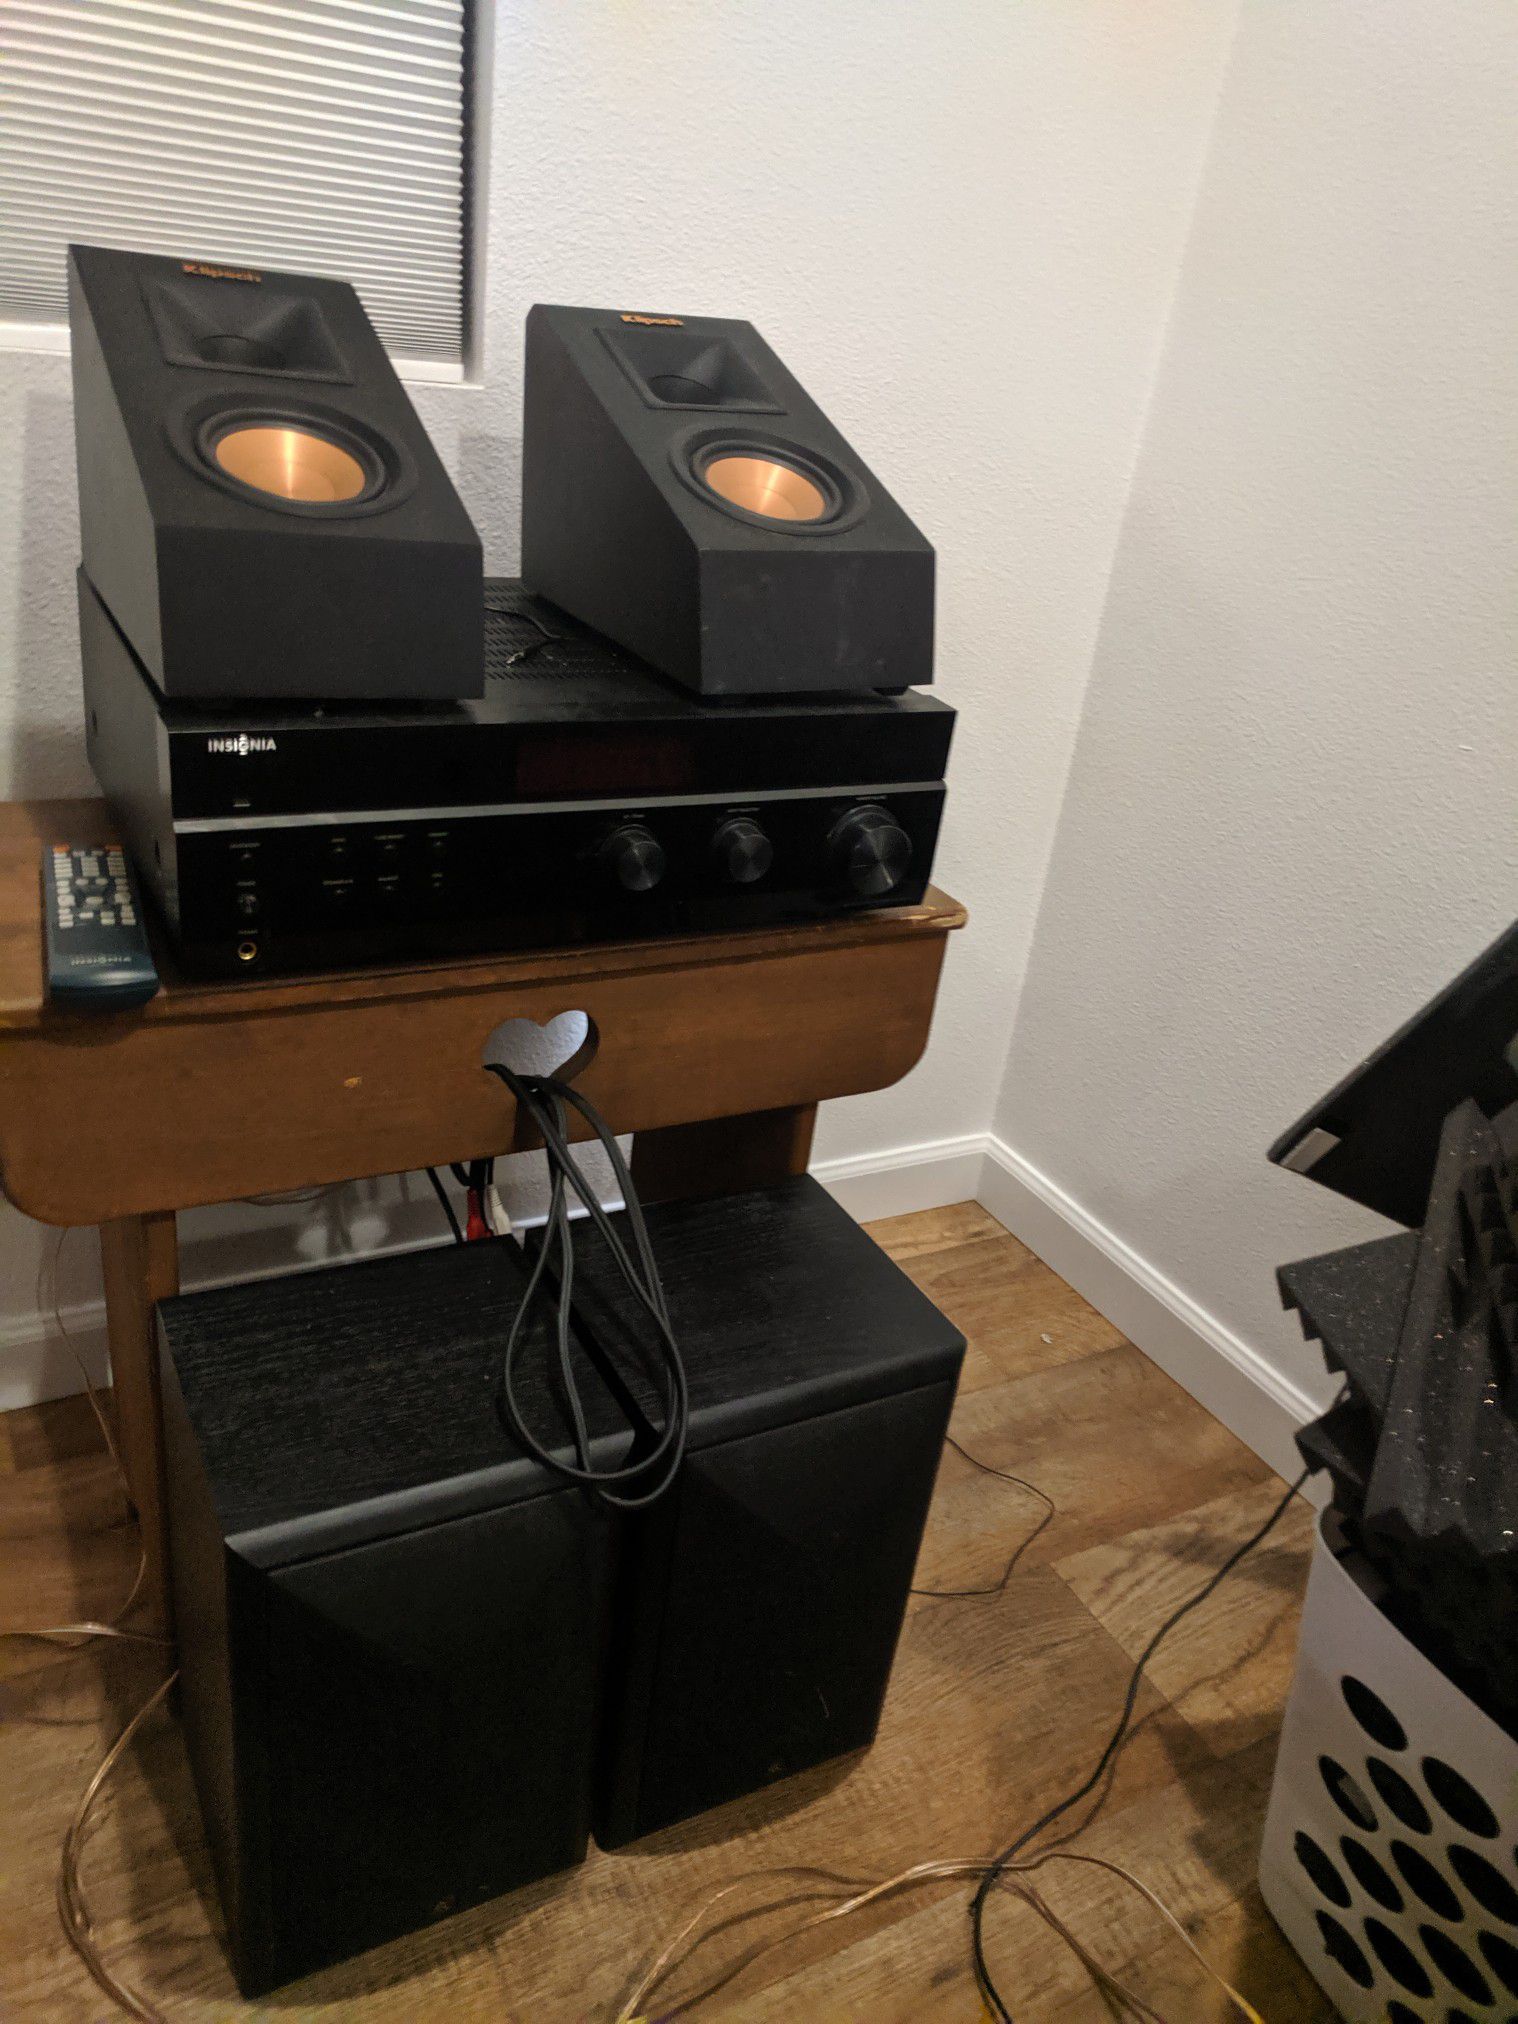 Stereo system (4speakers+receiver+wires)